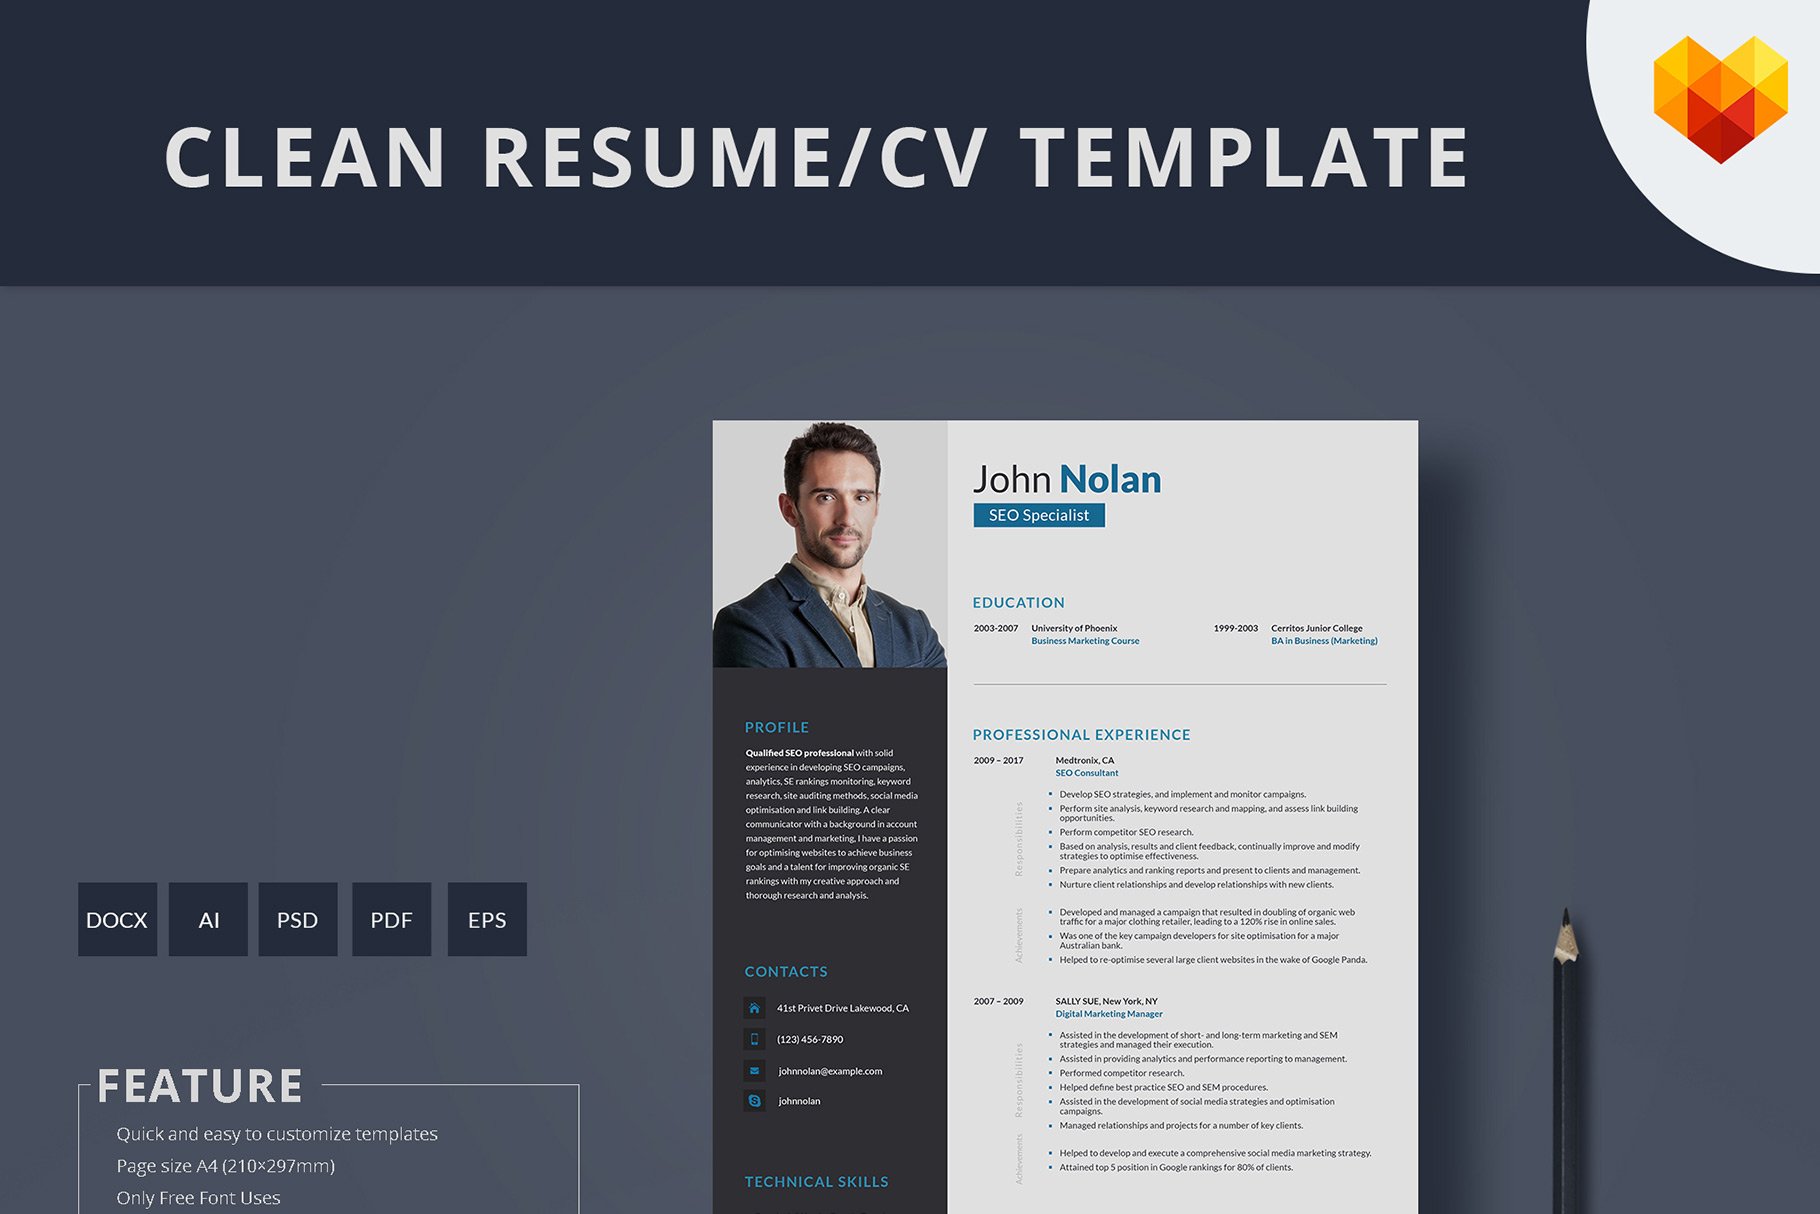 SEO Specialist Resume Template cover image.